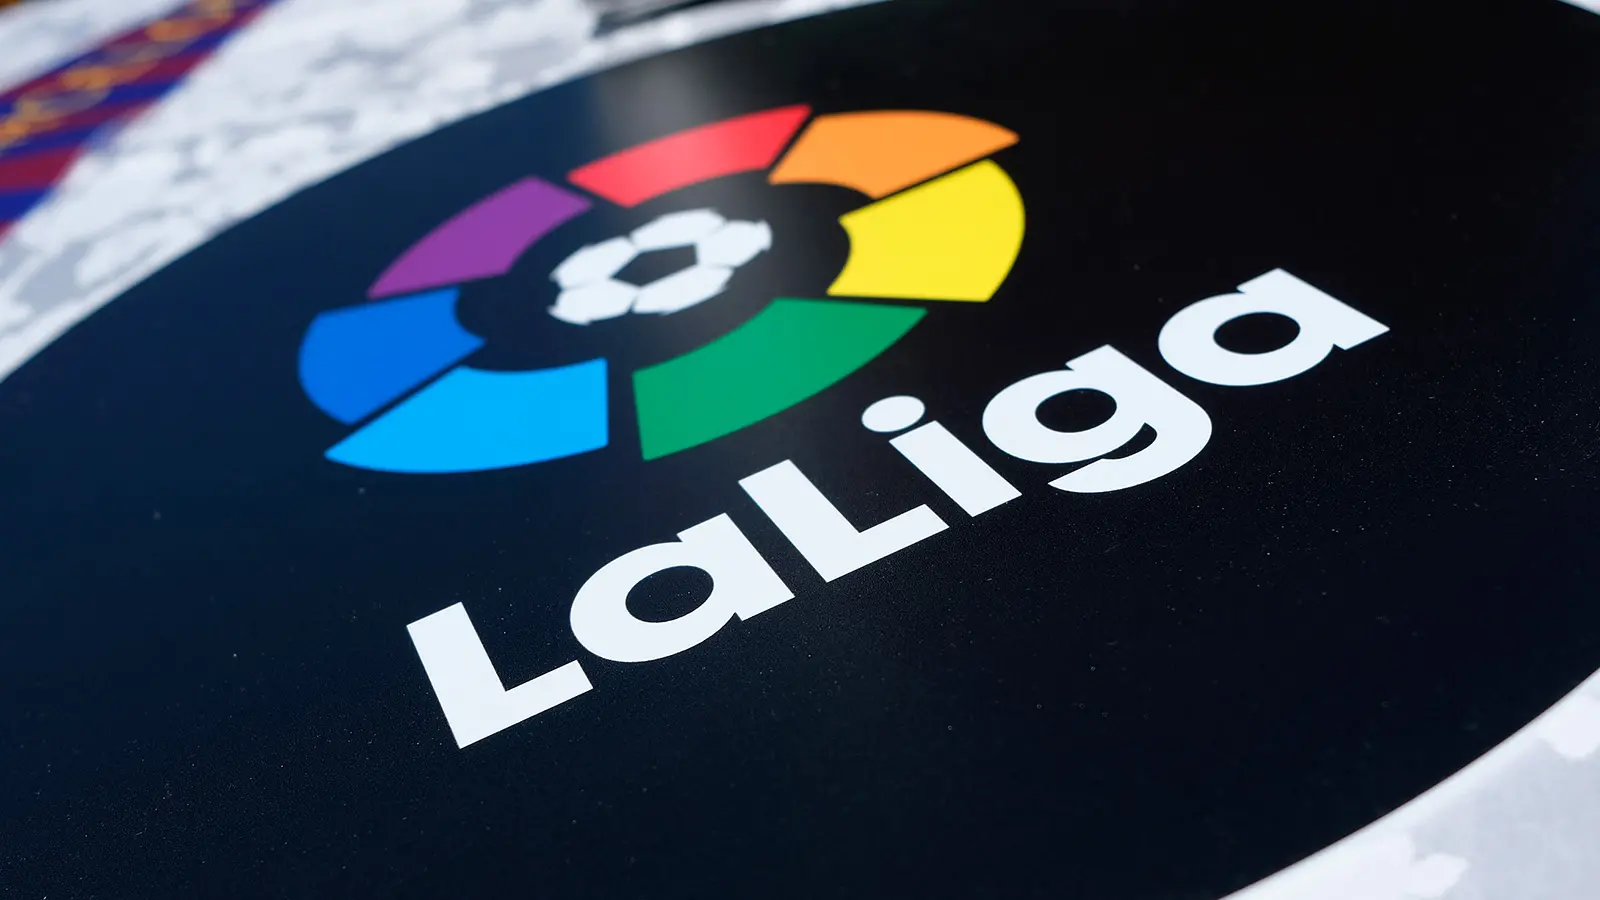 LaLiga awards: Nominees out as Barcelona, Real Madrid, Girona dominate [Full list]